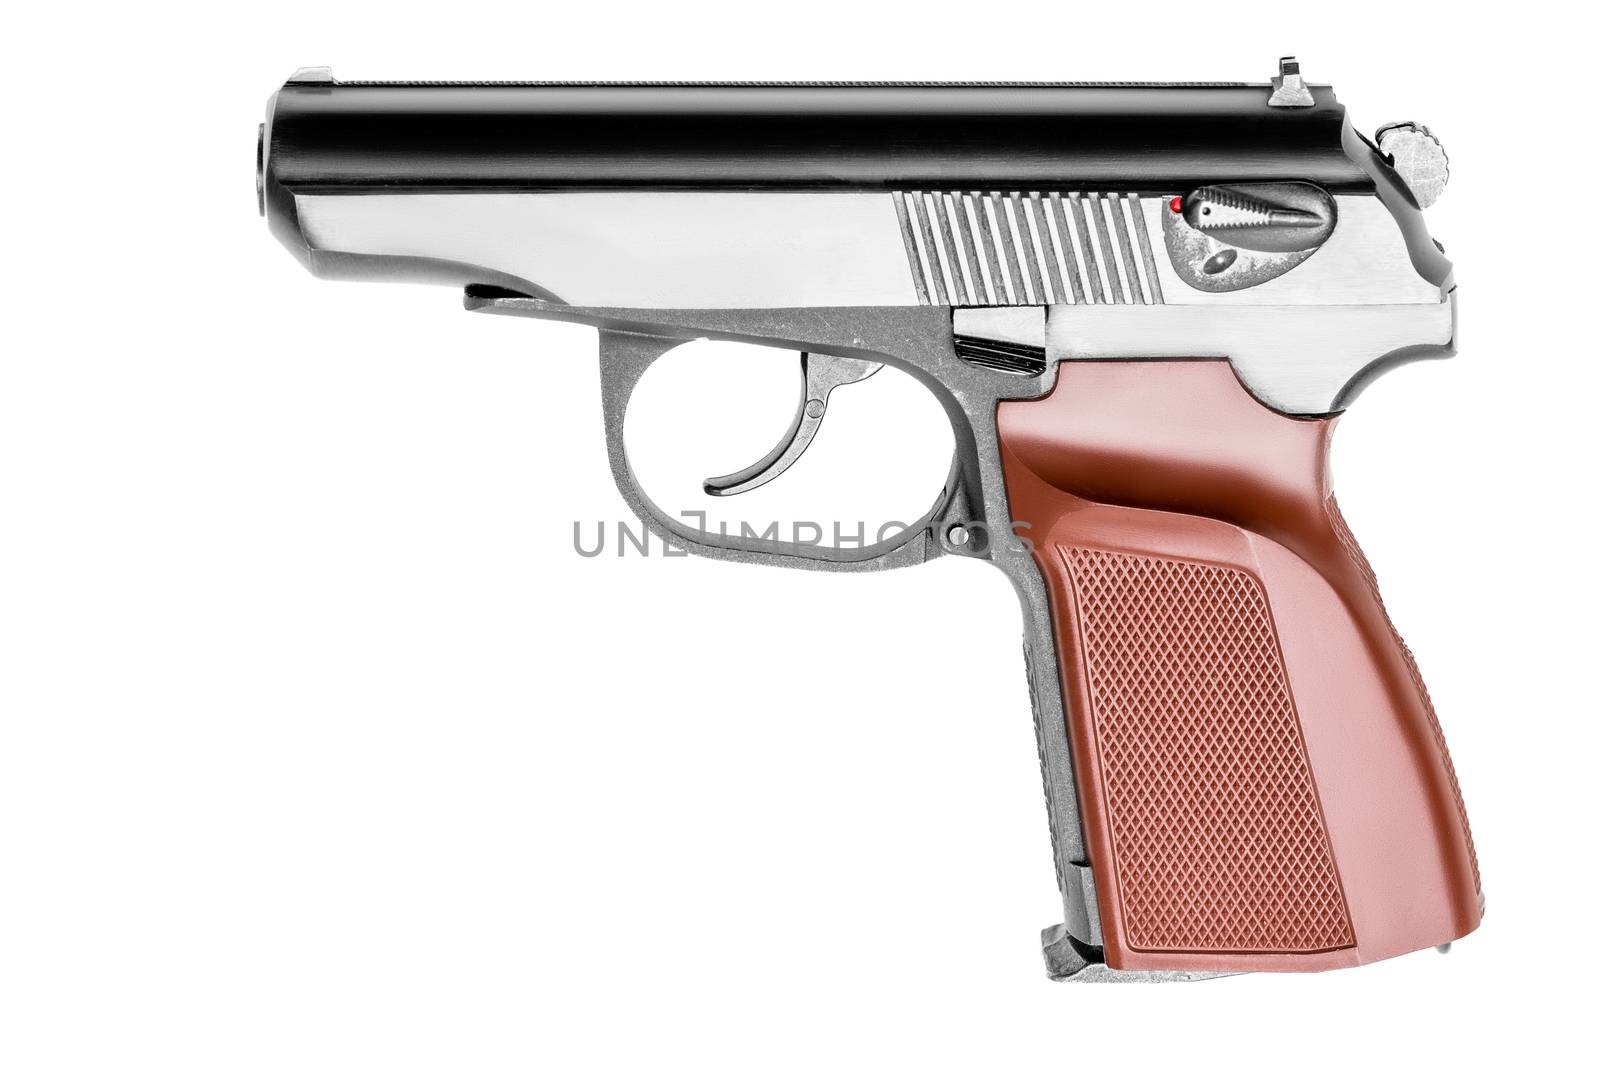 fire pistol close up on white background by kosmsos111